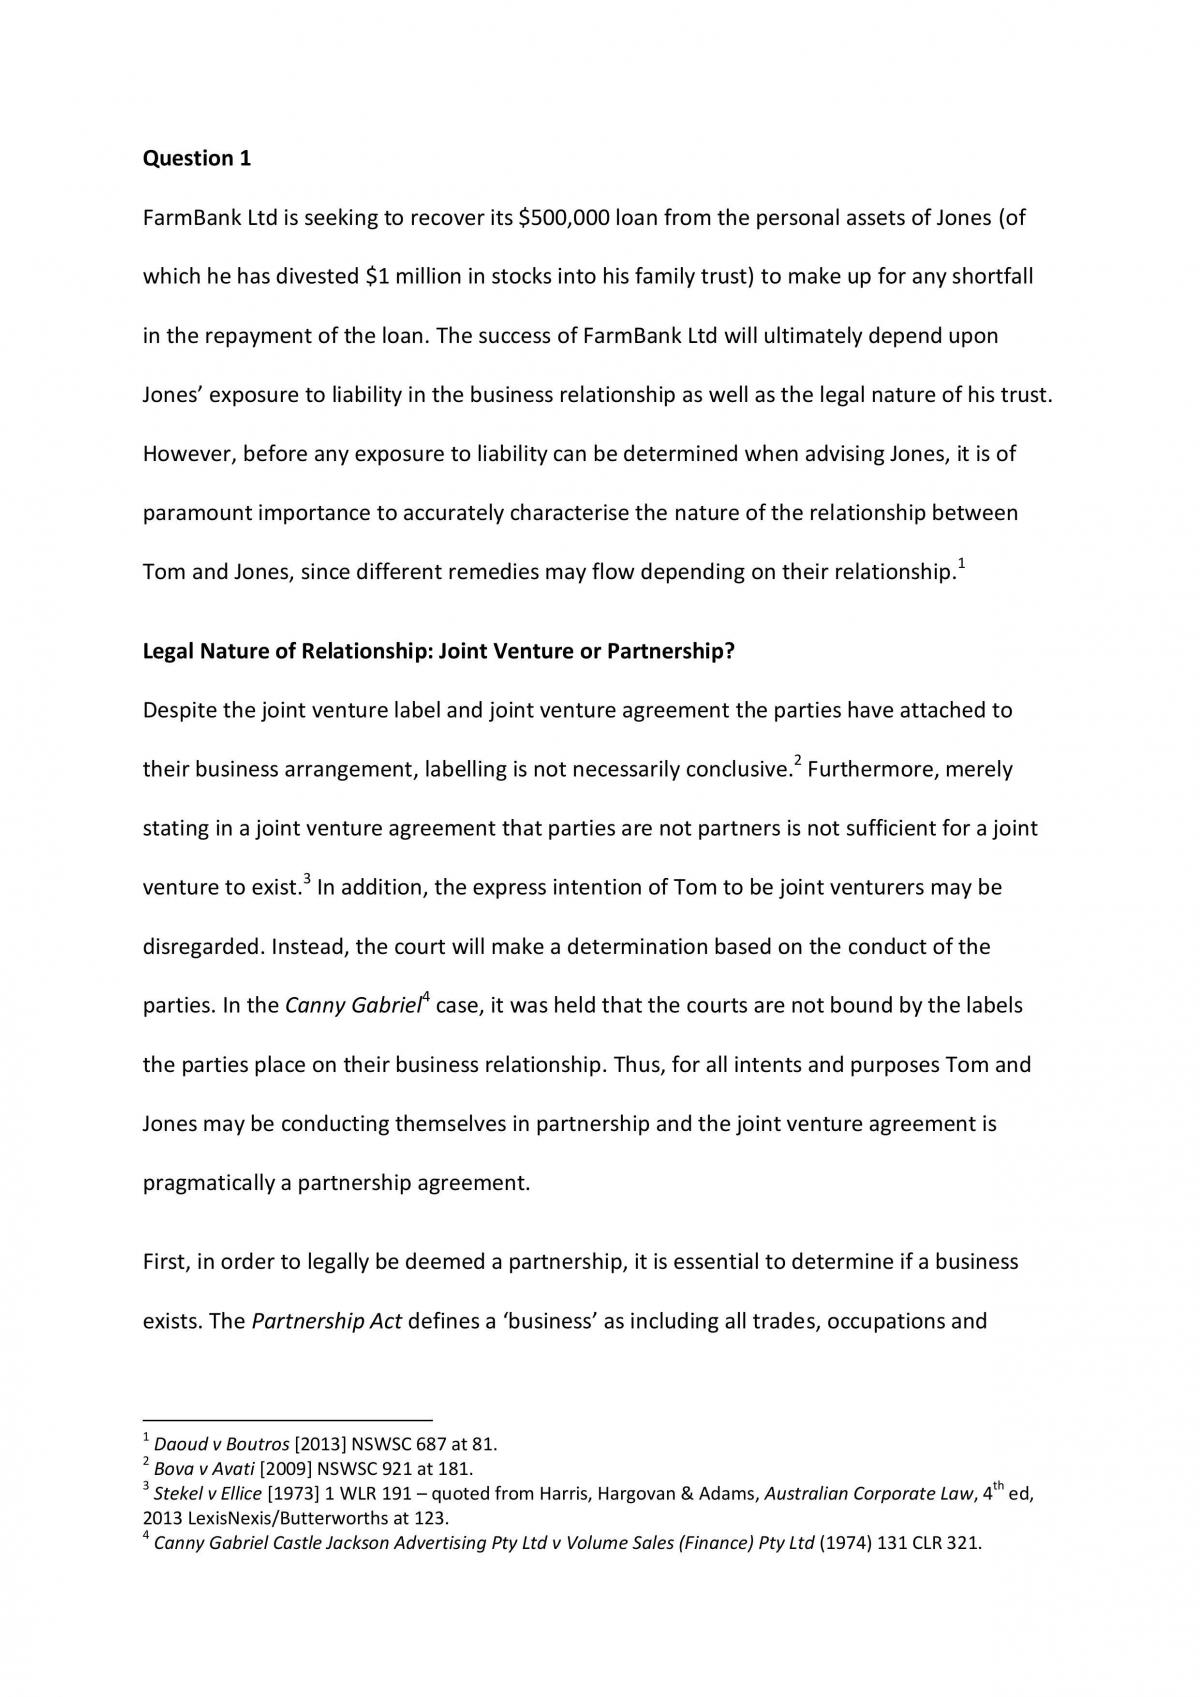 TABL2741 - Research Assignment - Partnerships & Joint Ventures - Page 1